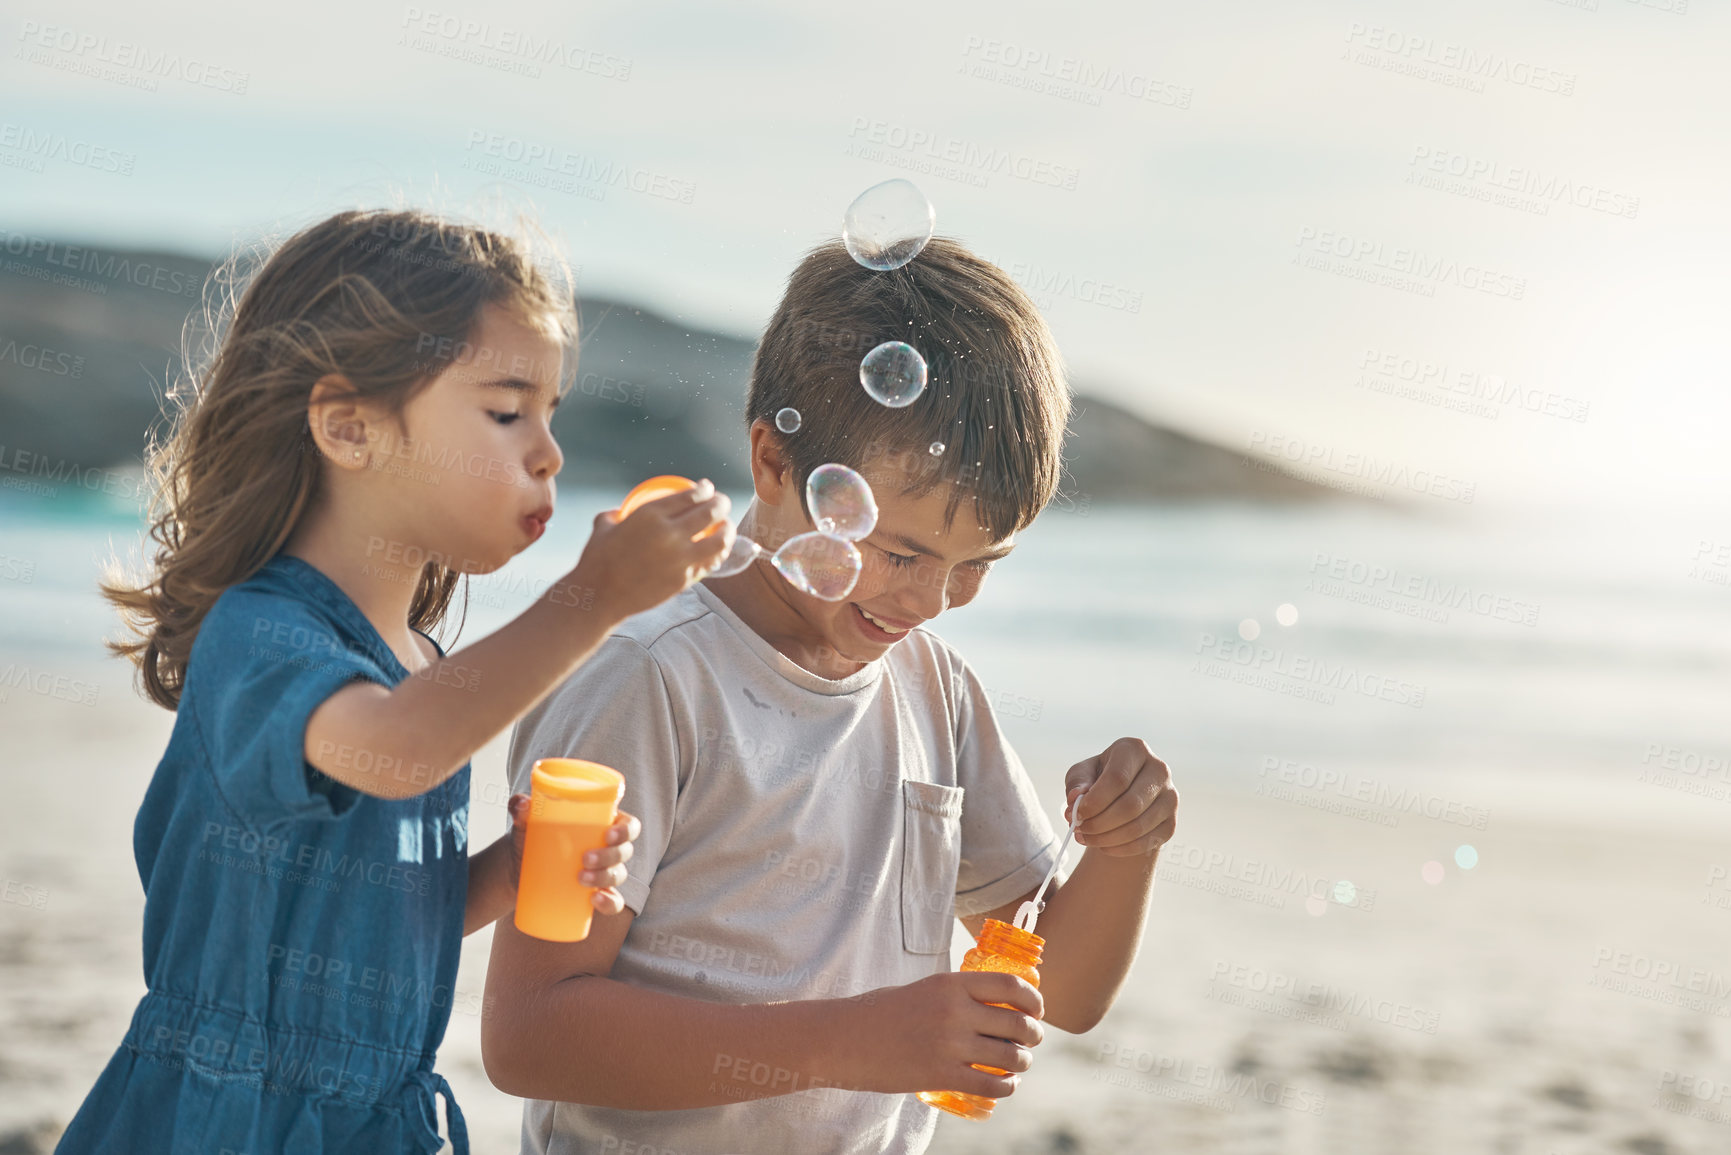 Buy stock photo Cropped shot of two young siblings standing together and blowing bubbles during a relaxing day on the beach